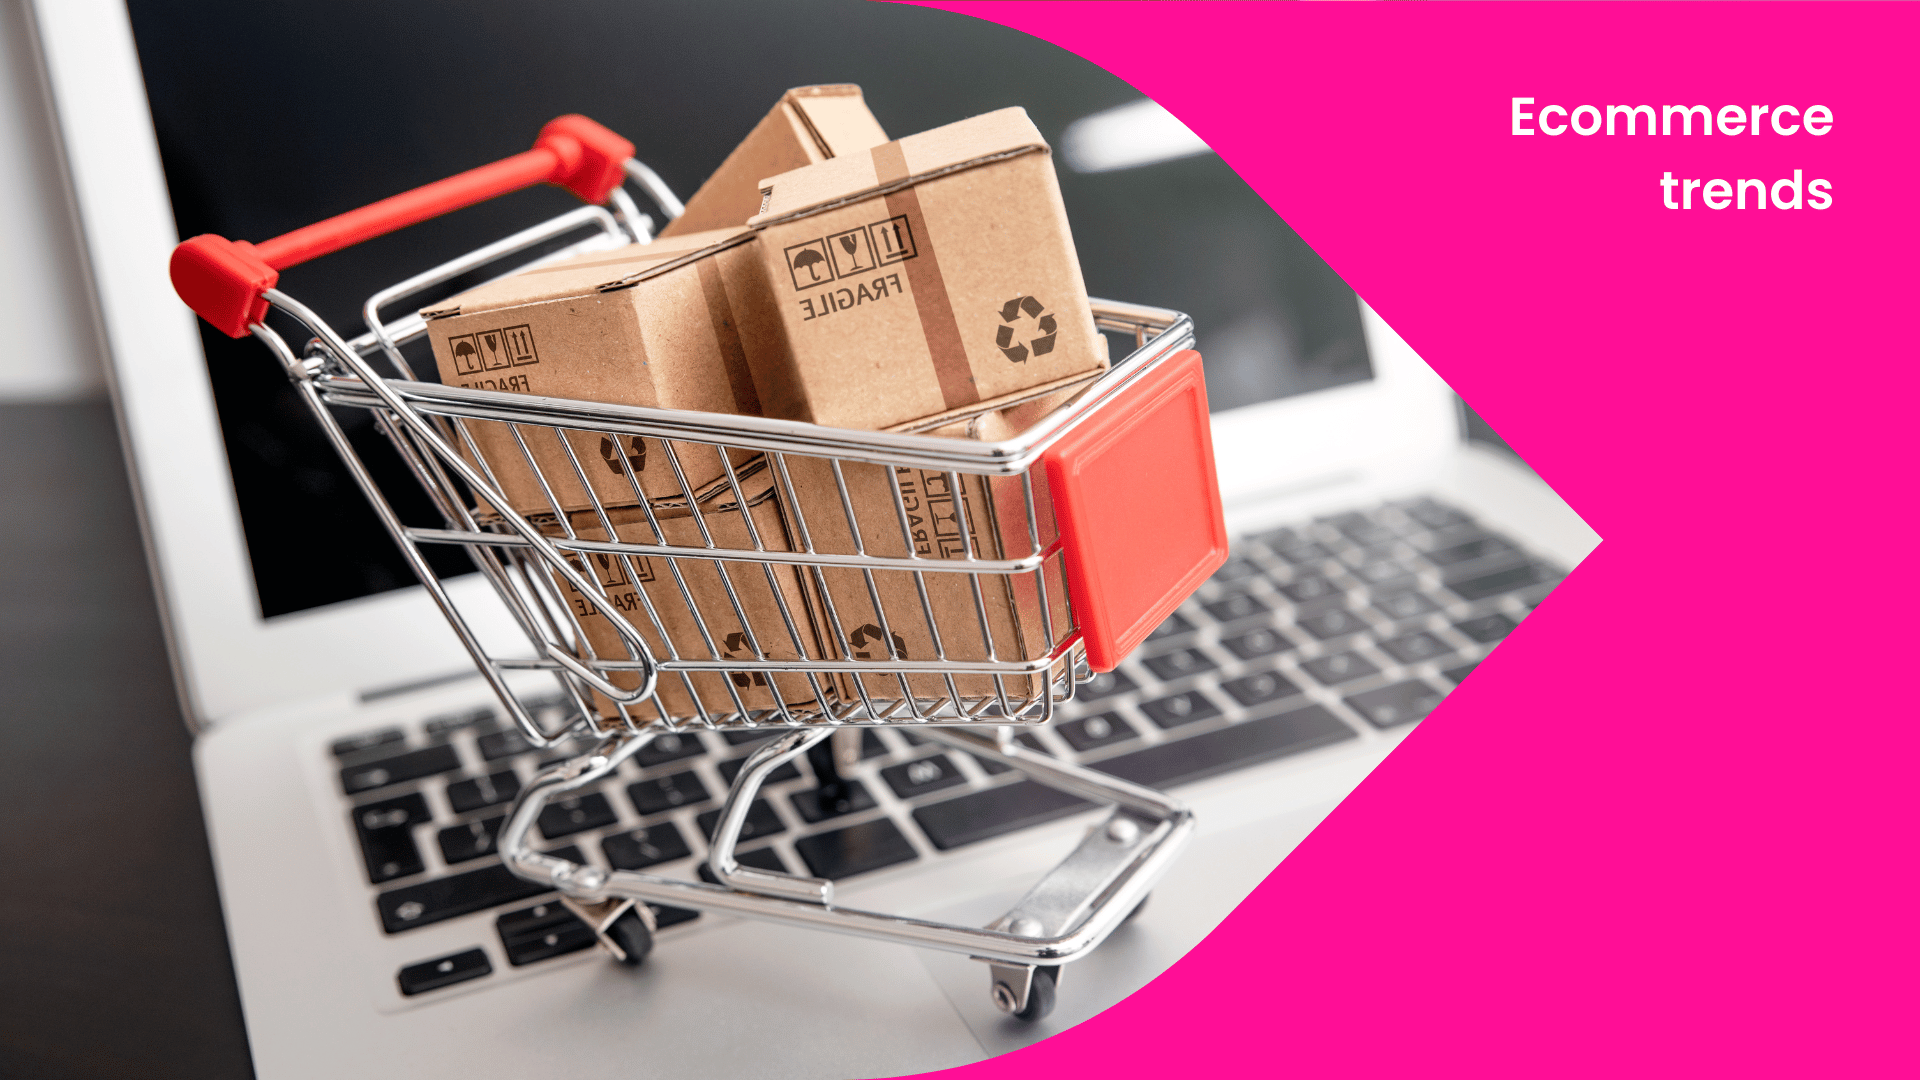 10 key ecommerce trends to know for 2023